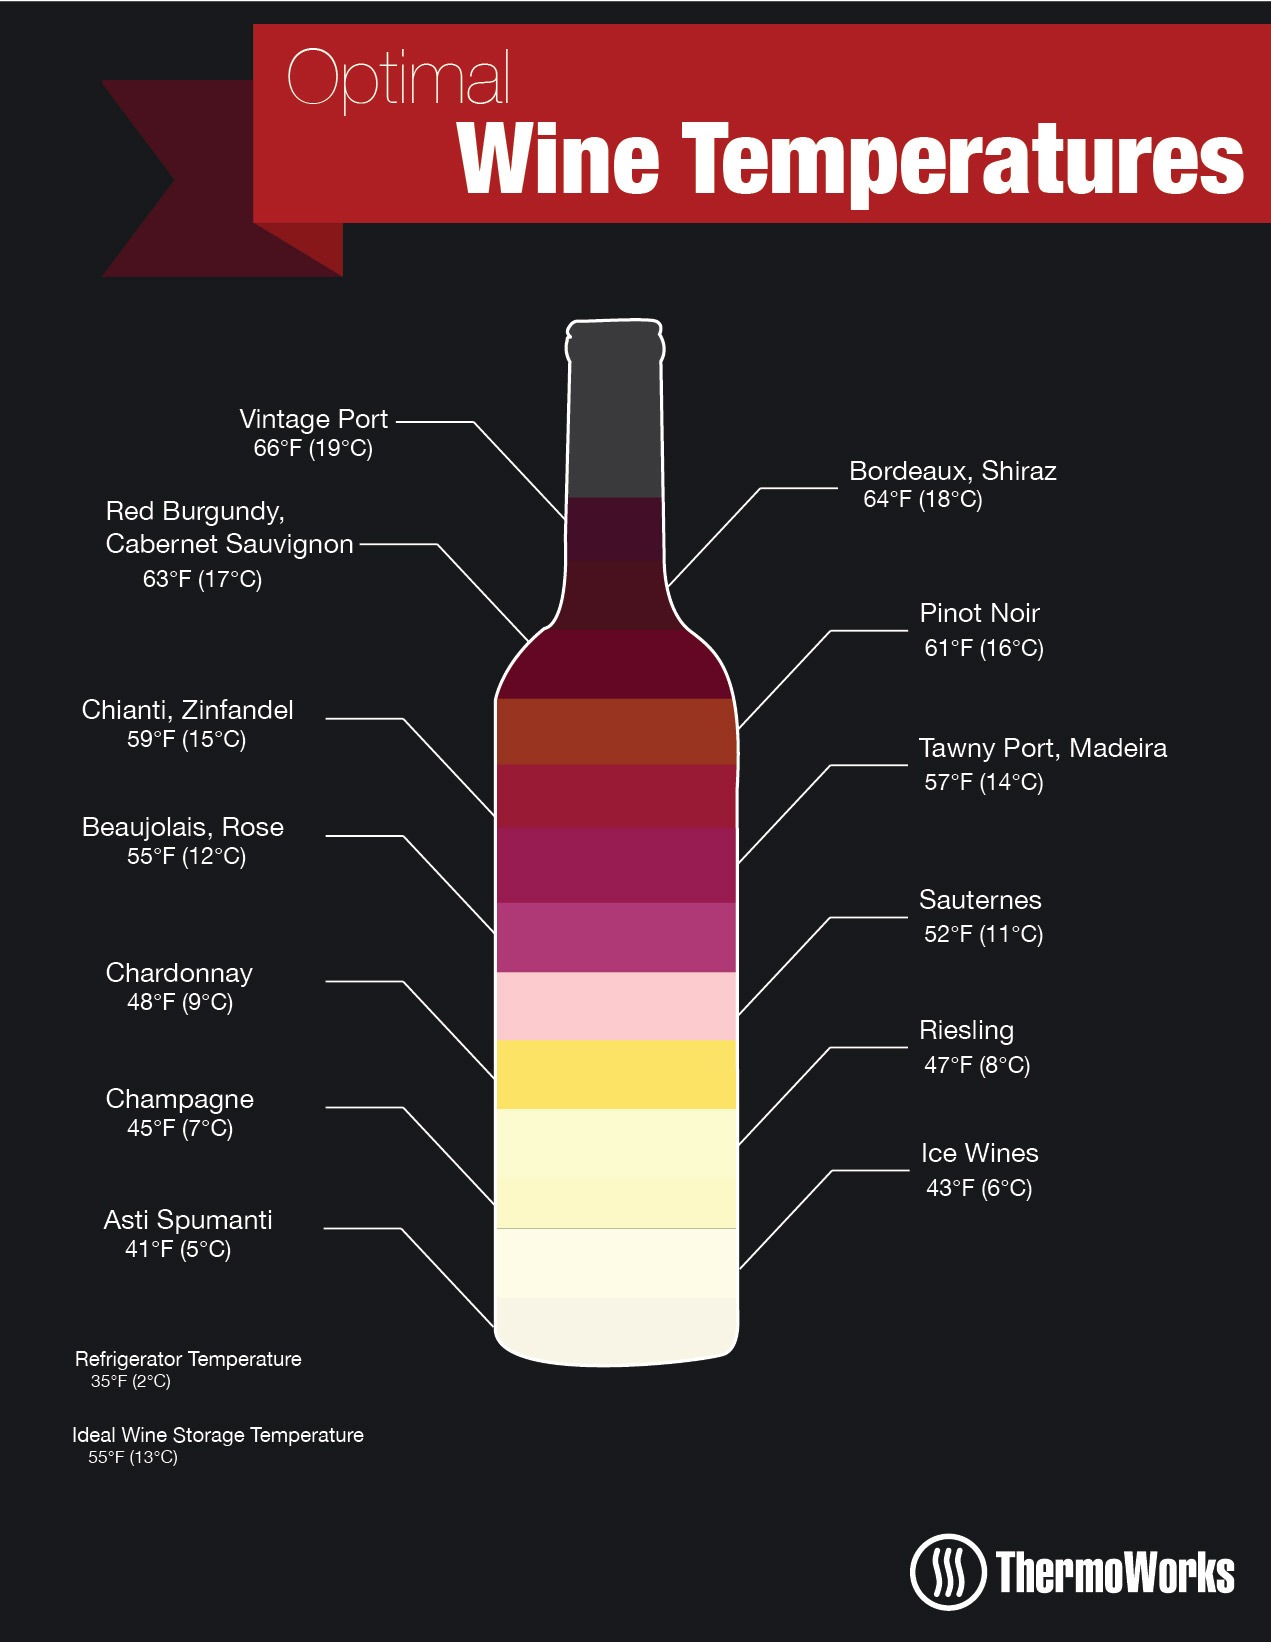 https://blog.thermoworks.com/wp-content/uploads/2015/12/wine-tips-infographic-1-1.jpg